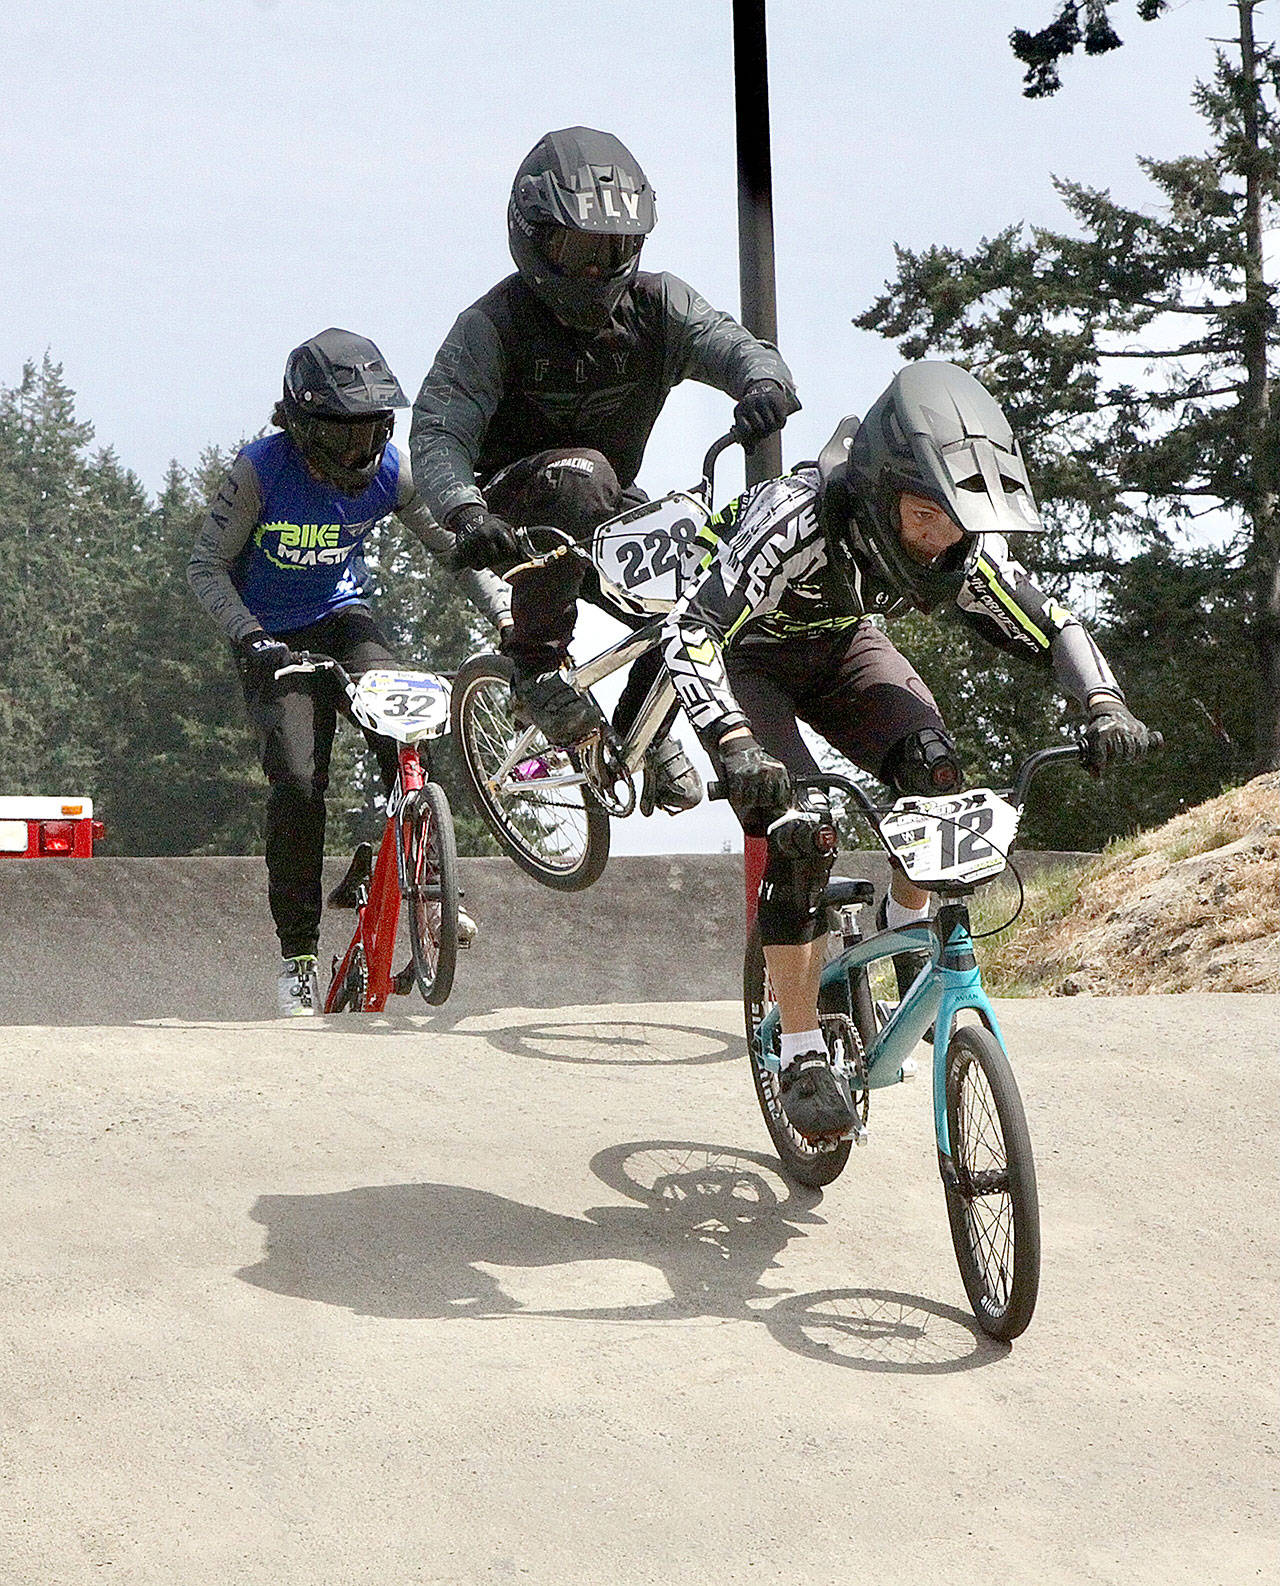 Dave Logan/for Peninsula Daily News No. 32 Damien Avila of Spokane and No. 228 Vaunn Zimmerman of Redmond doing a little wiggle with his bike trying to get some advantage to overtake the leader and in the lead No. 12 Peyton Calhoun of Port Orchard in Sunday’s Gold Cup qualifier at the Lincoln Park BMX track in Port Angeles.